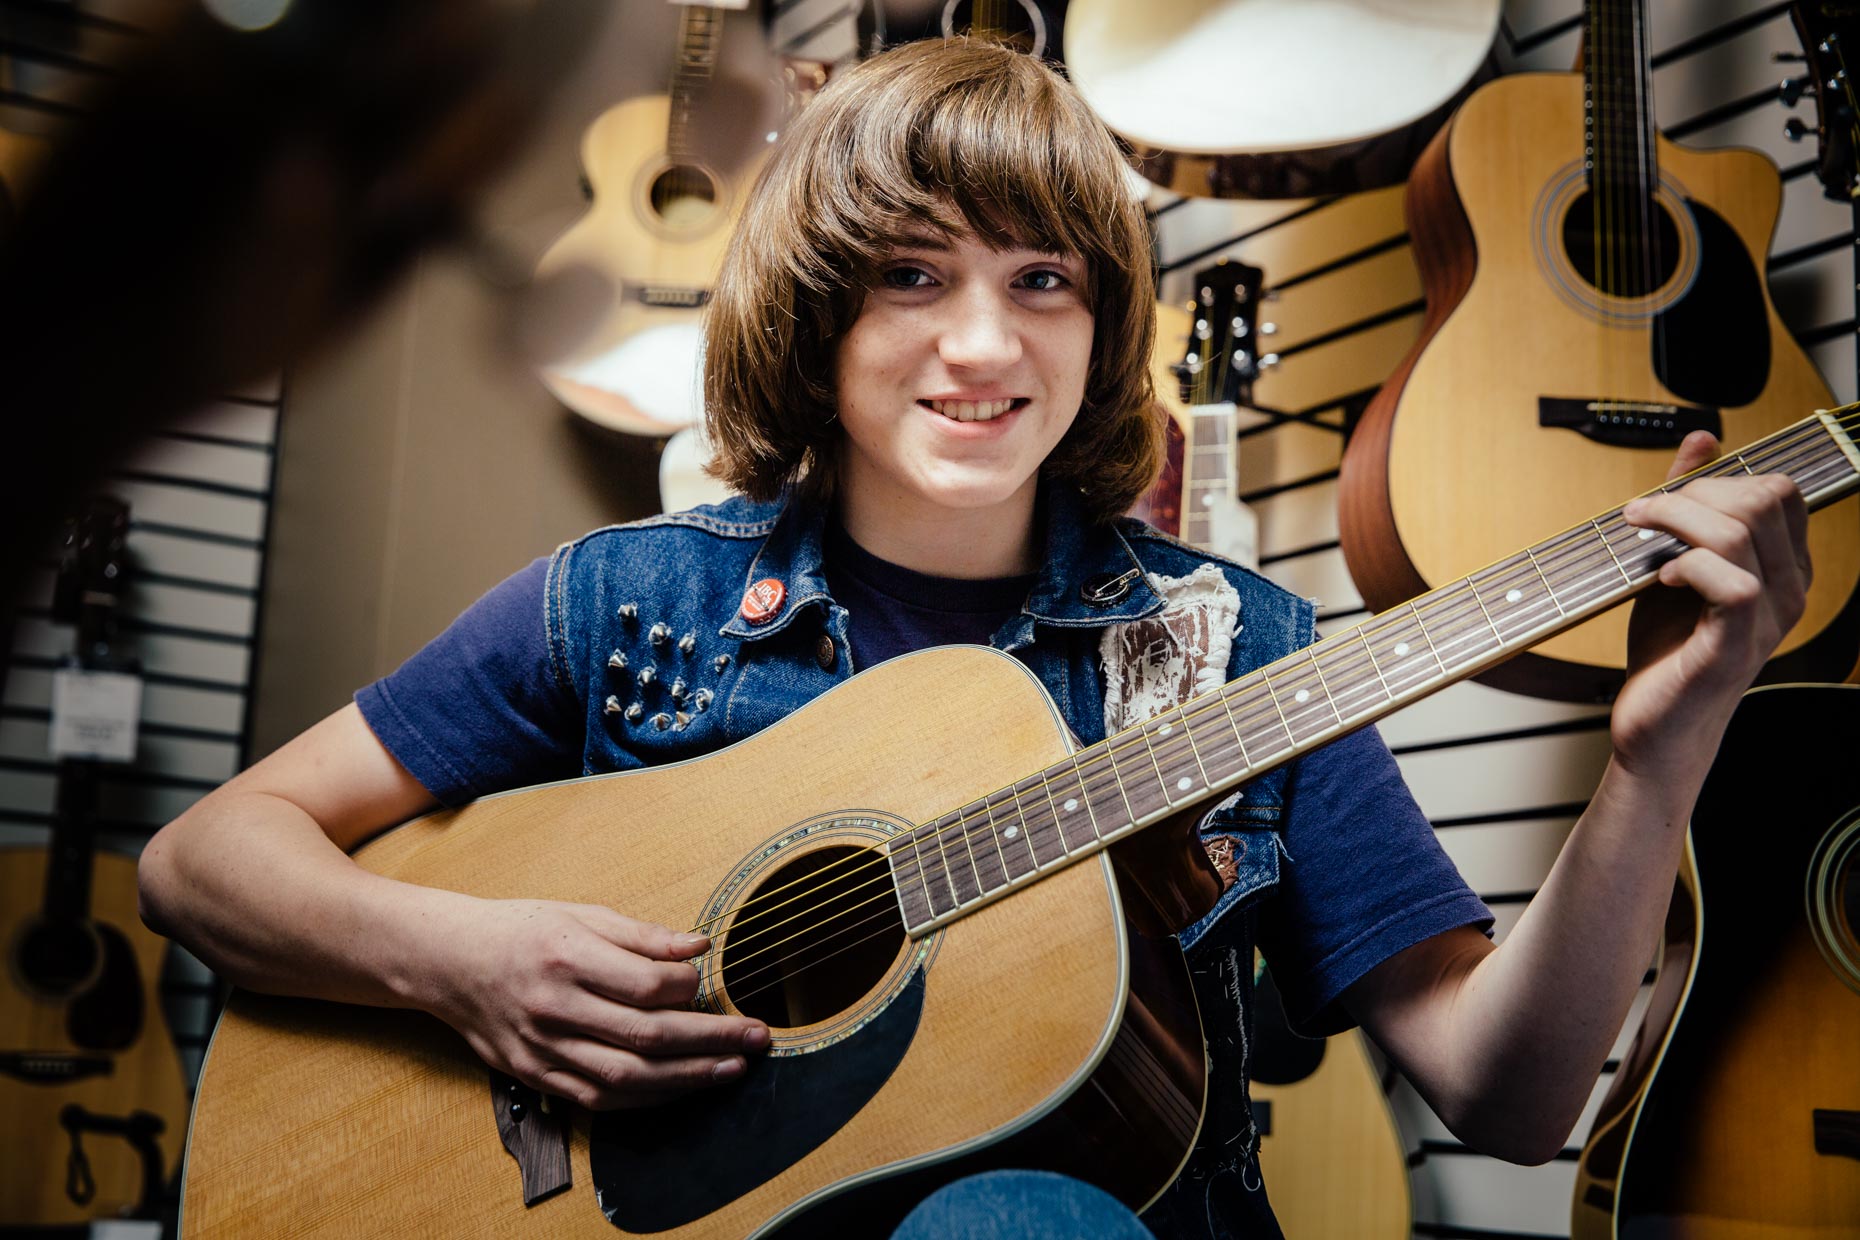 Boy with long hair and guitar in music store.